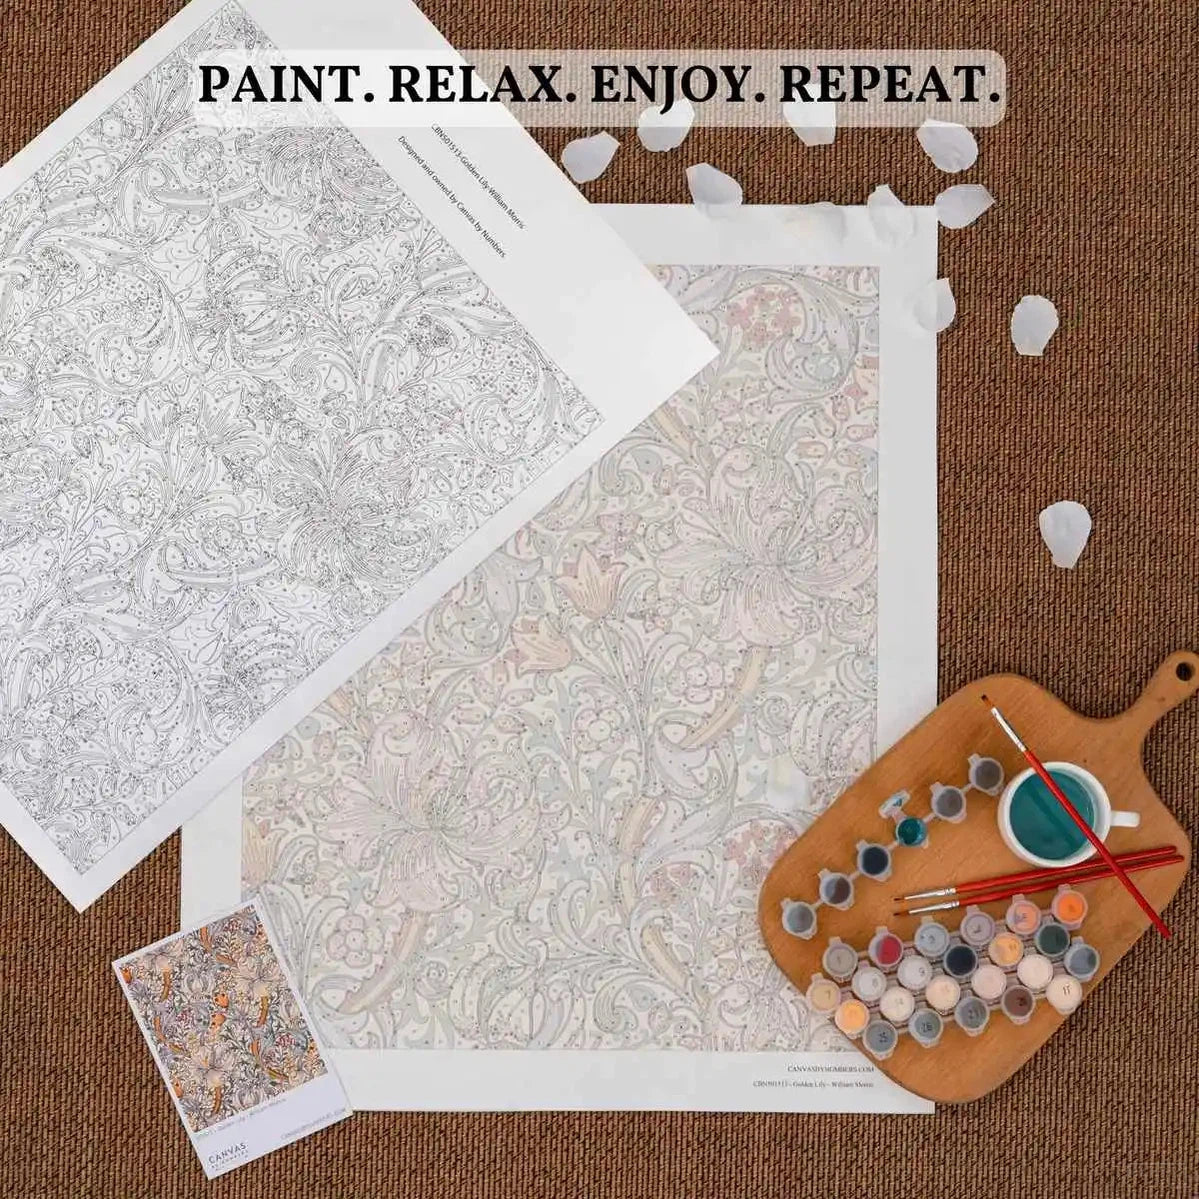 Flowery Depths - Paint by Numbers-Explore an undersea floral fantasy with 'Flowery Depths', a paint by numbers kit where an octopus and Art Nouveau-inspired blooms unite.-Canvas by Numbers